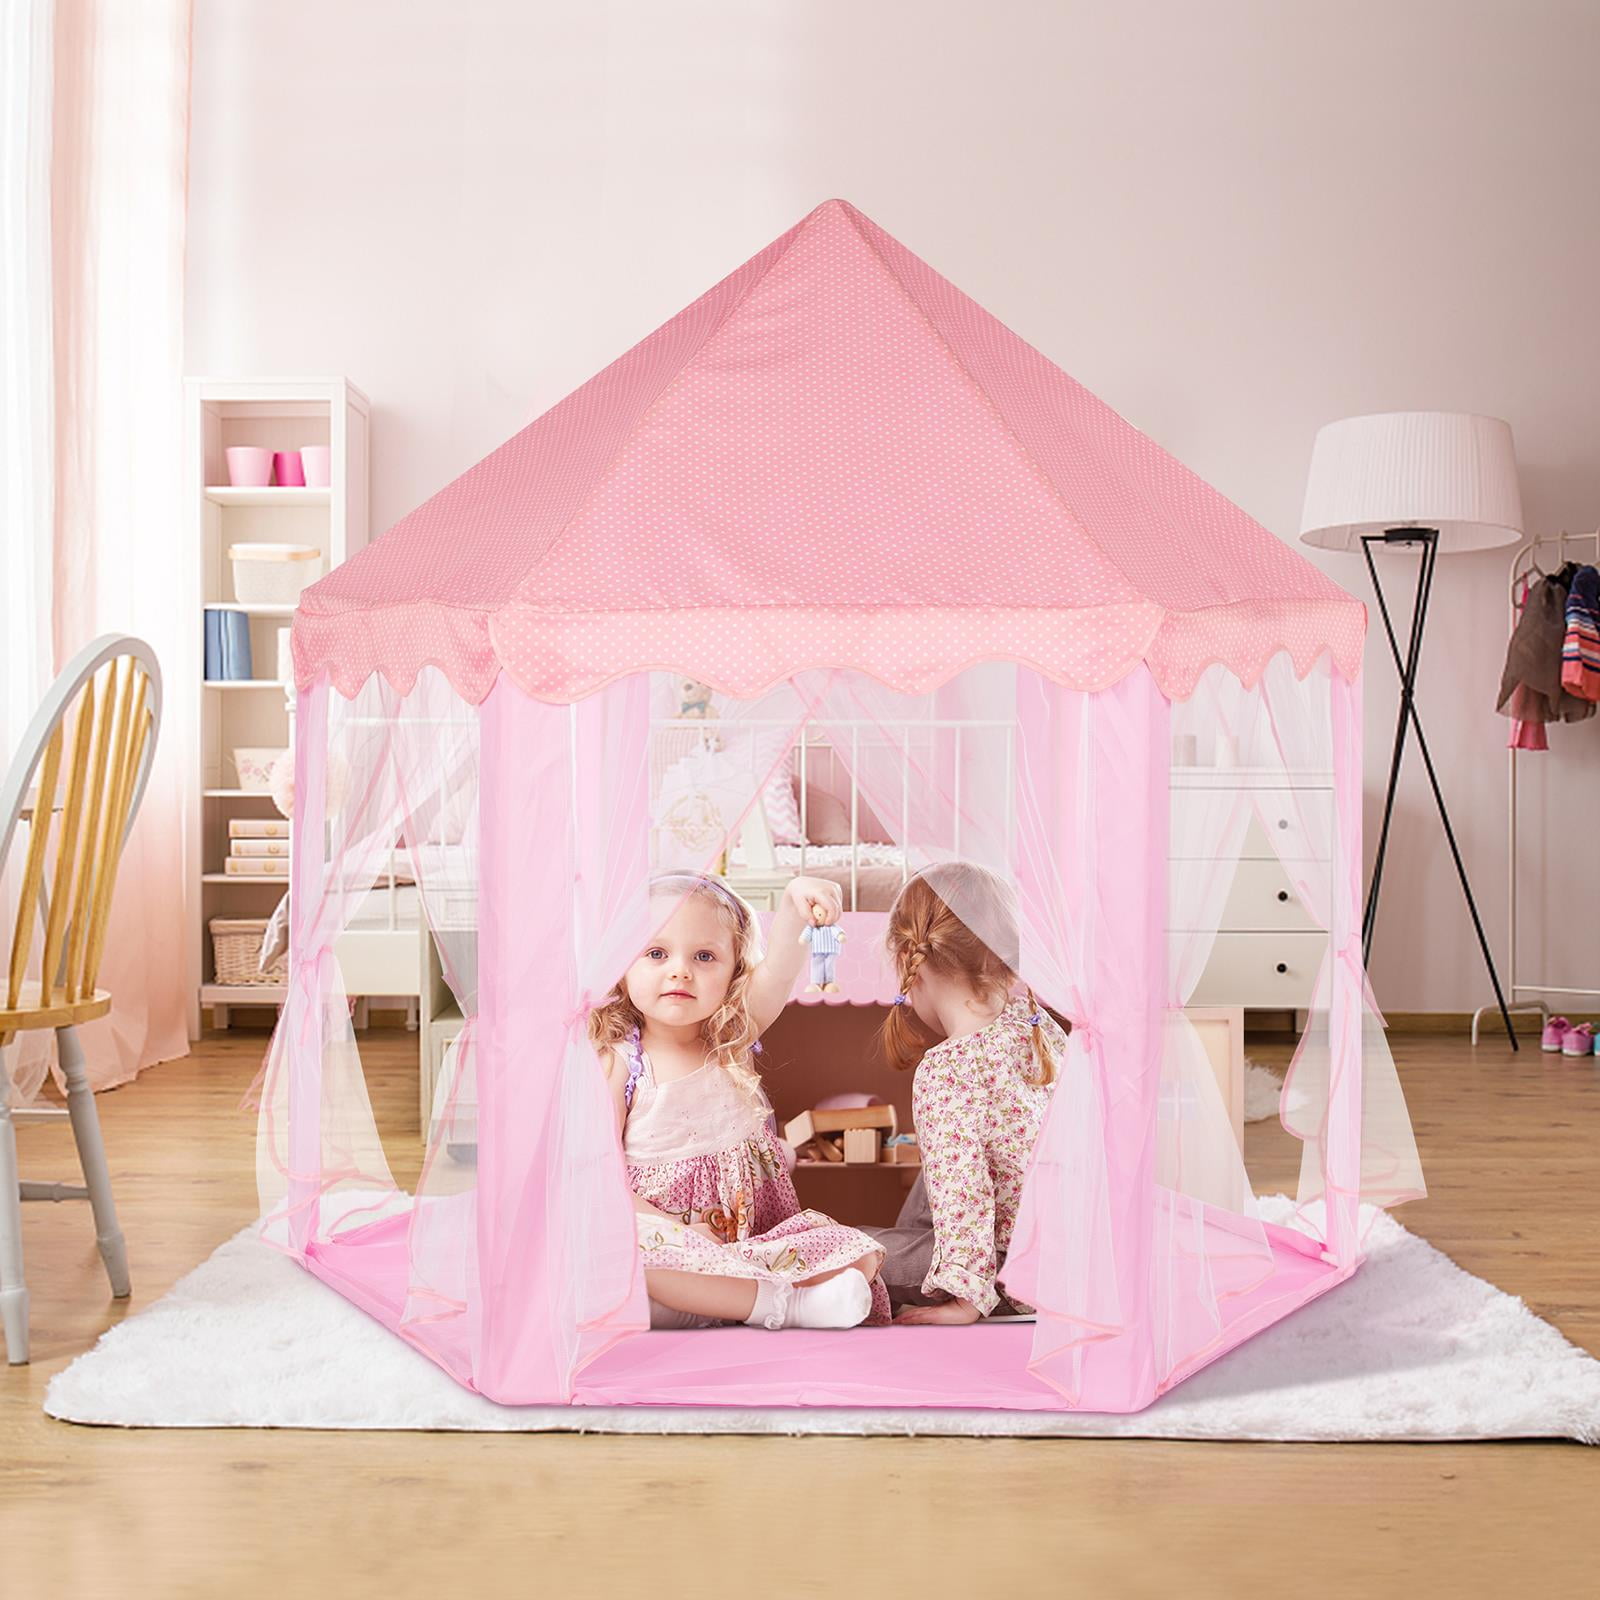 Play Tent Portable Folding Pop Up Kids Girl Princess Castle Outdoor House Pink 